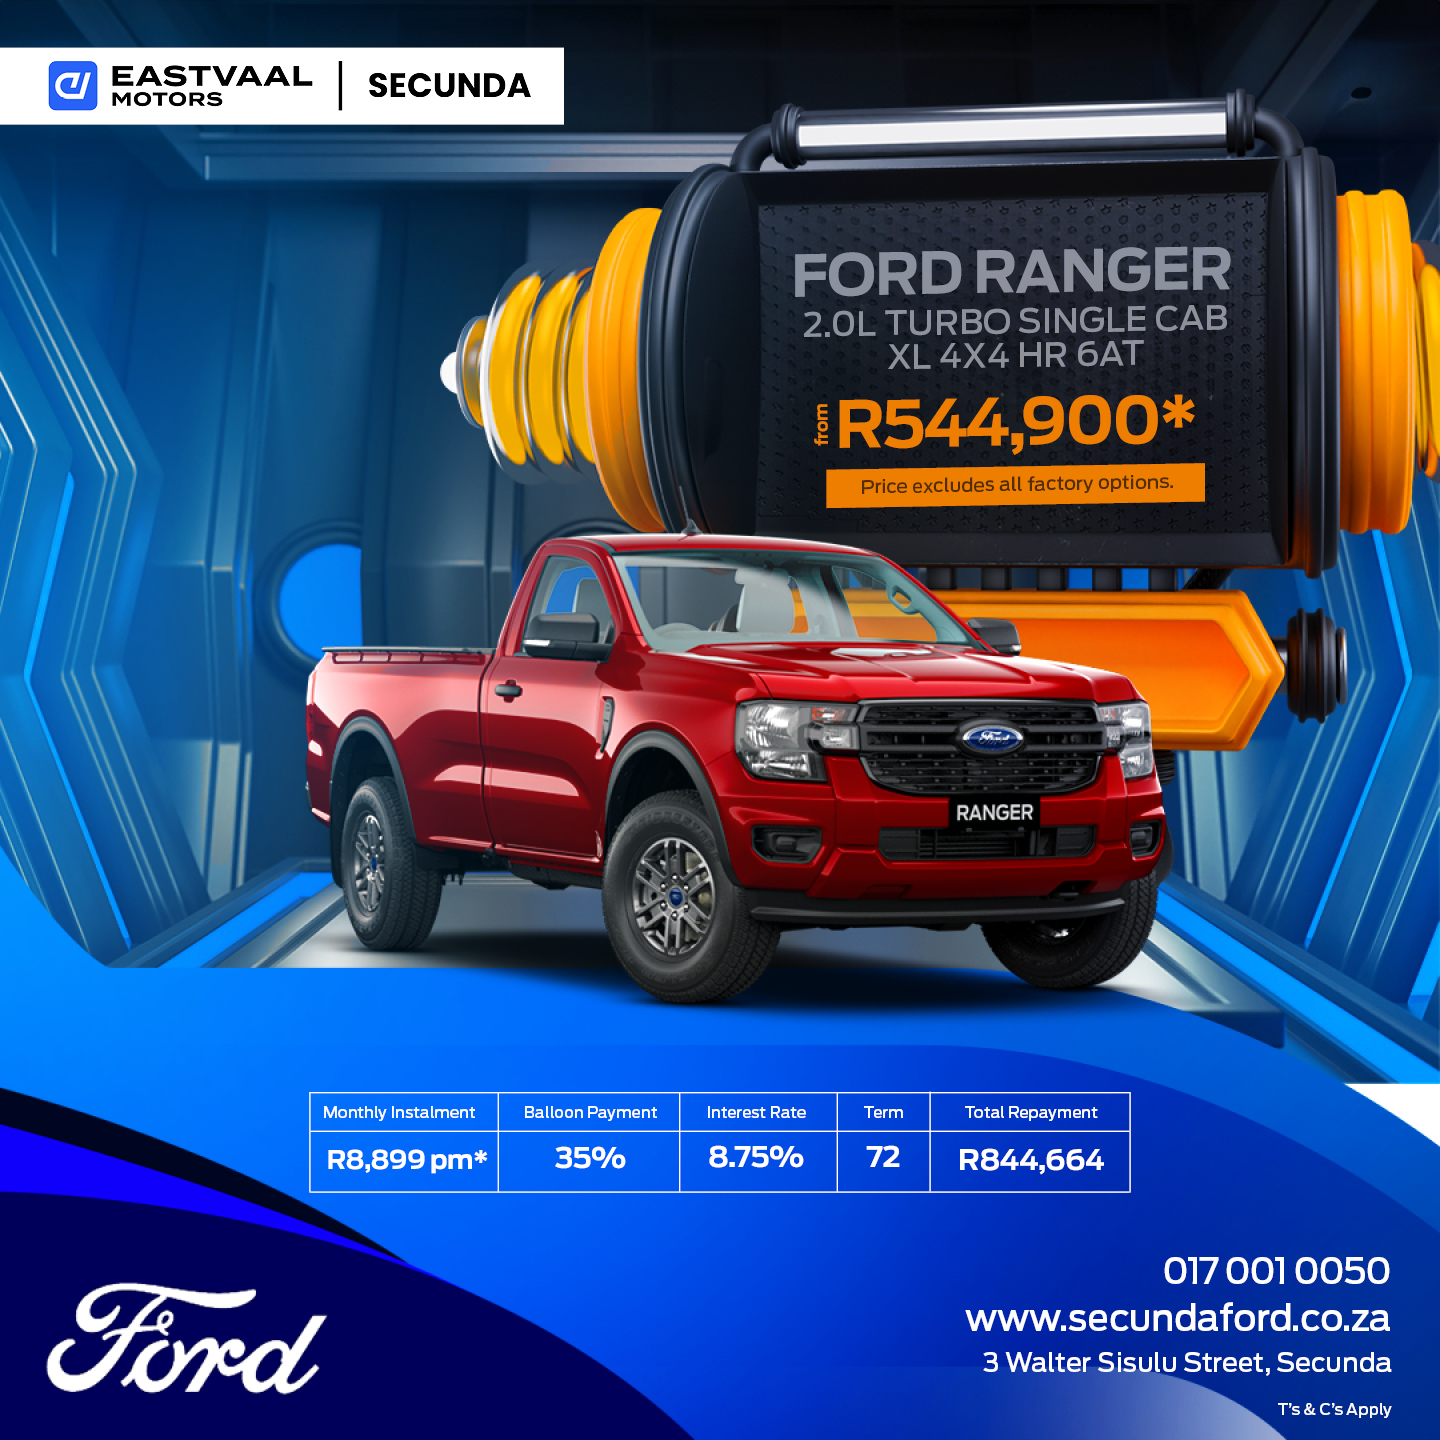 Ford Ranger 2.0L Turbo Single Cab XL 4×4 HR 6AT image from 